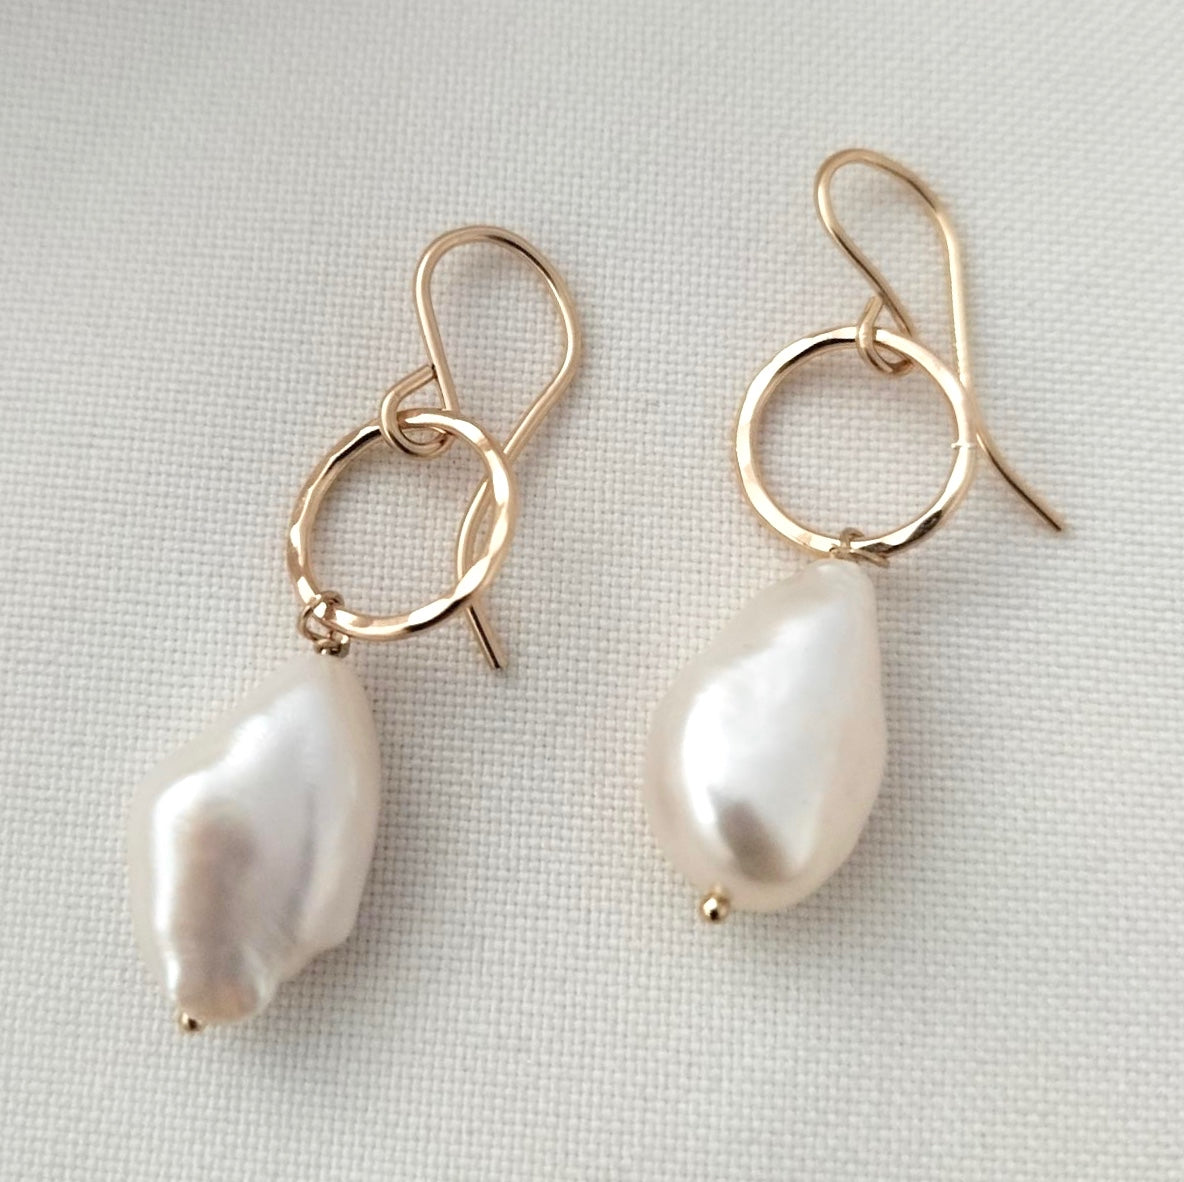 Gold Circle and Pearl earrings